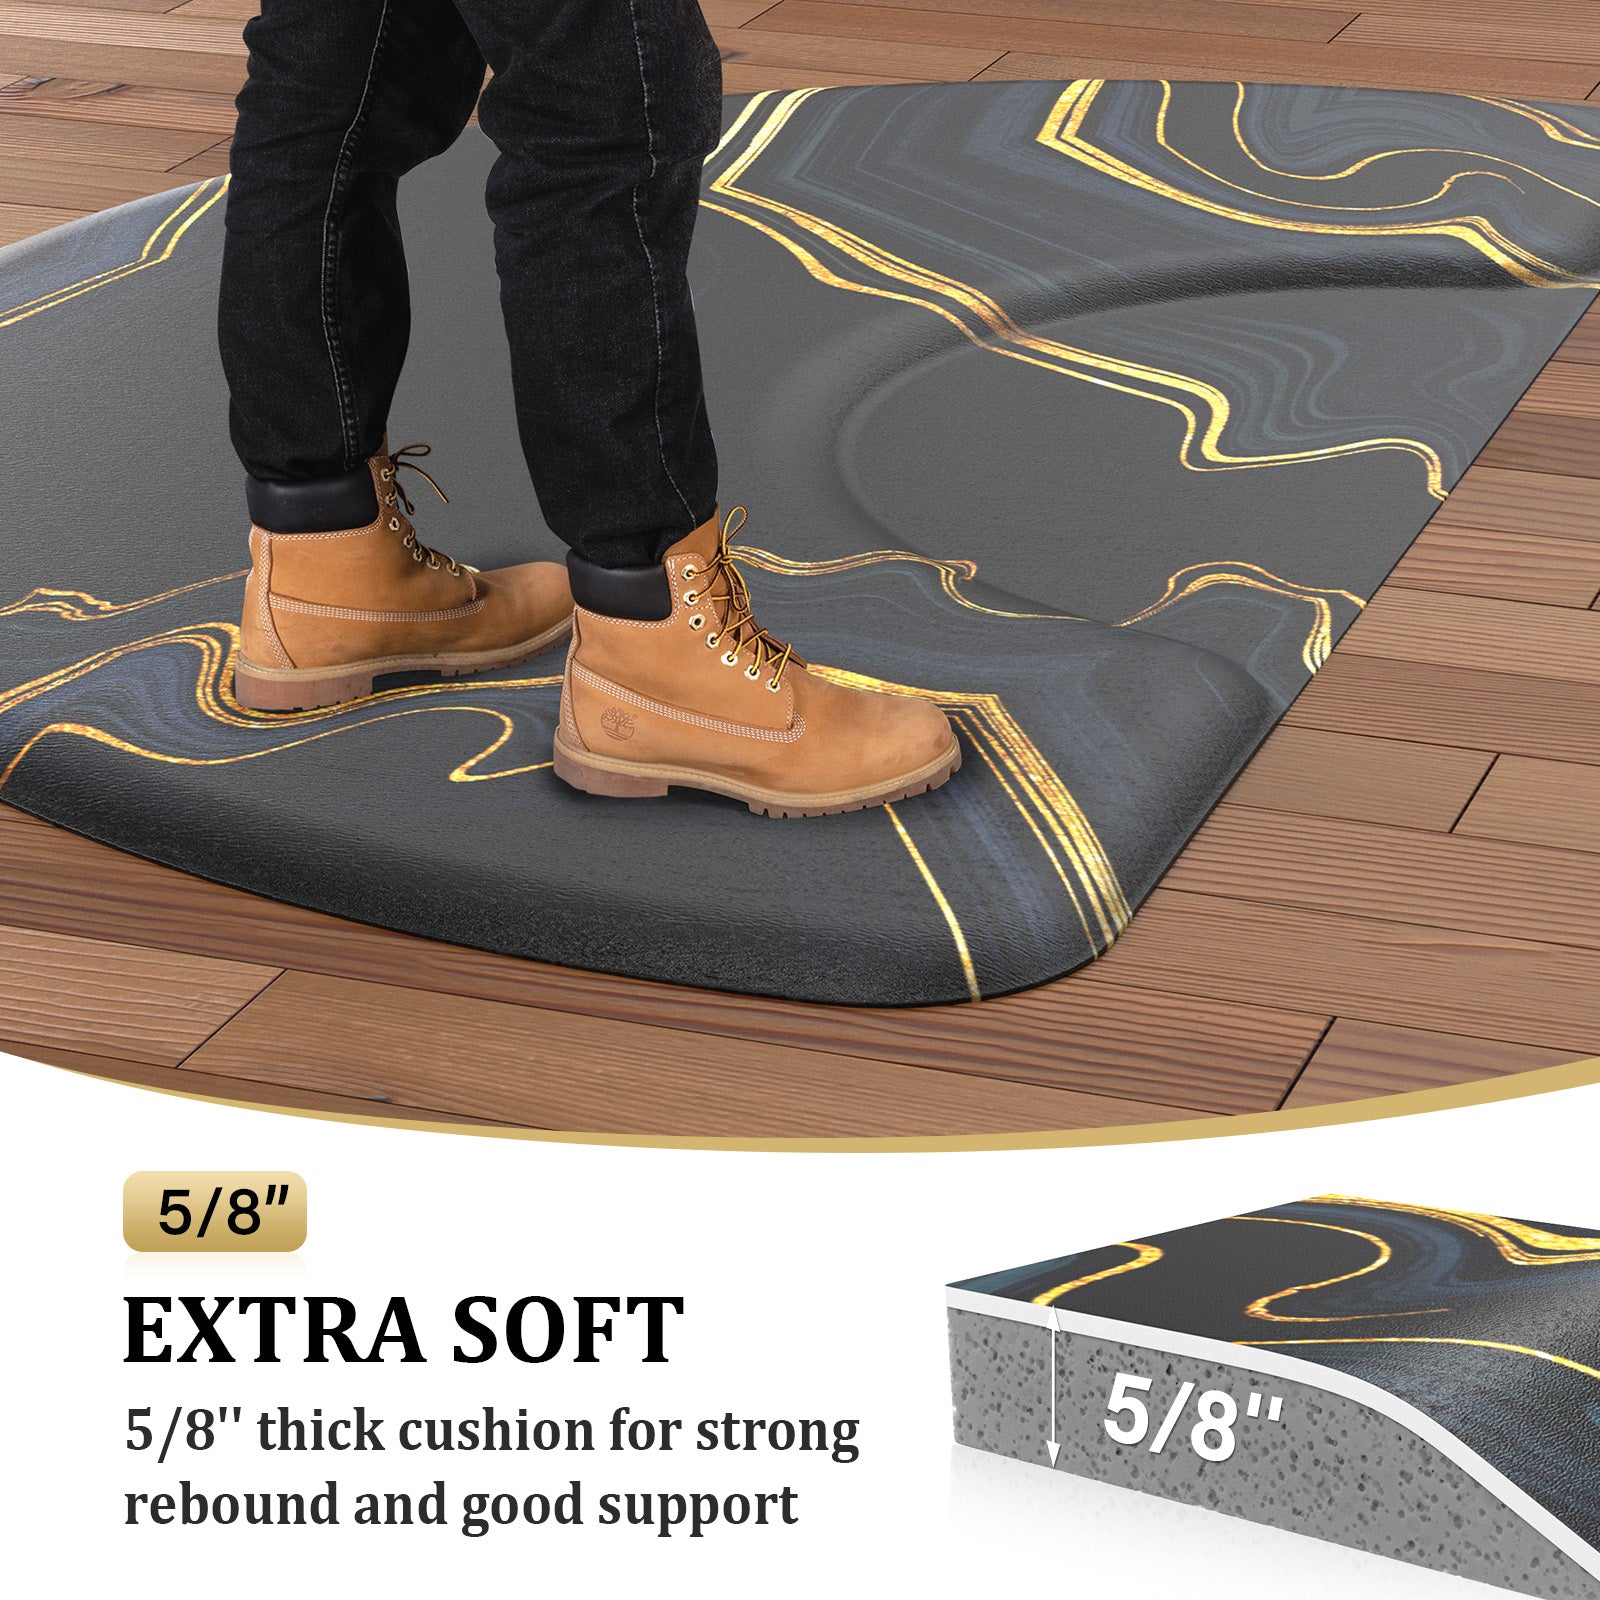 Anti-Fatigue Kitchen Mats - 8 Favorite Styles You Will Love! 